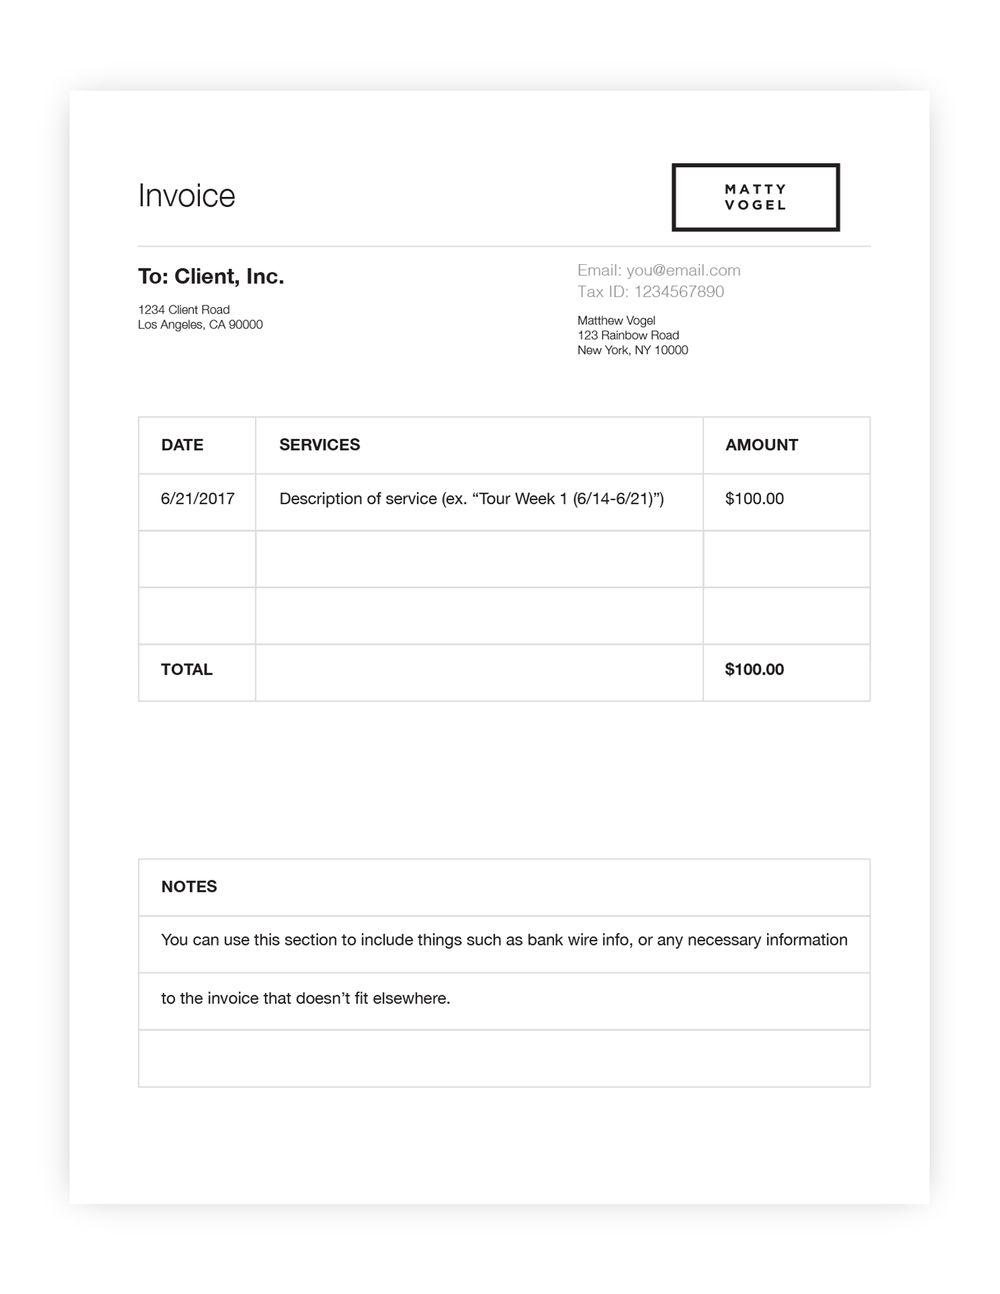 Free Photography Invoice Template Matty Vogel Photographer